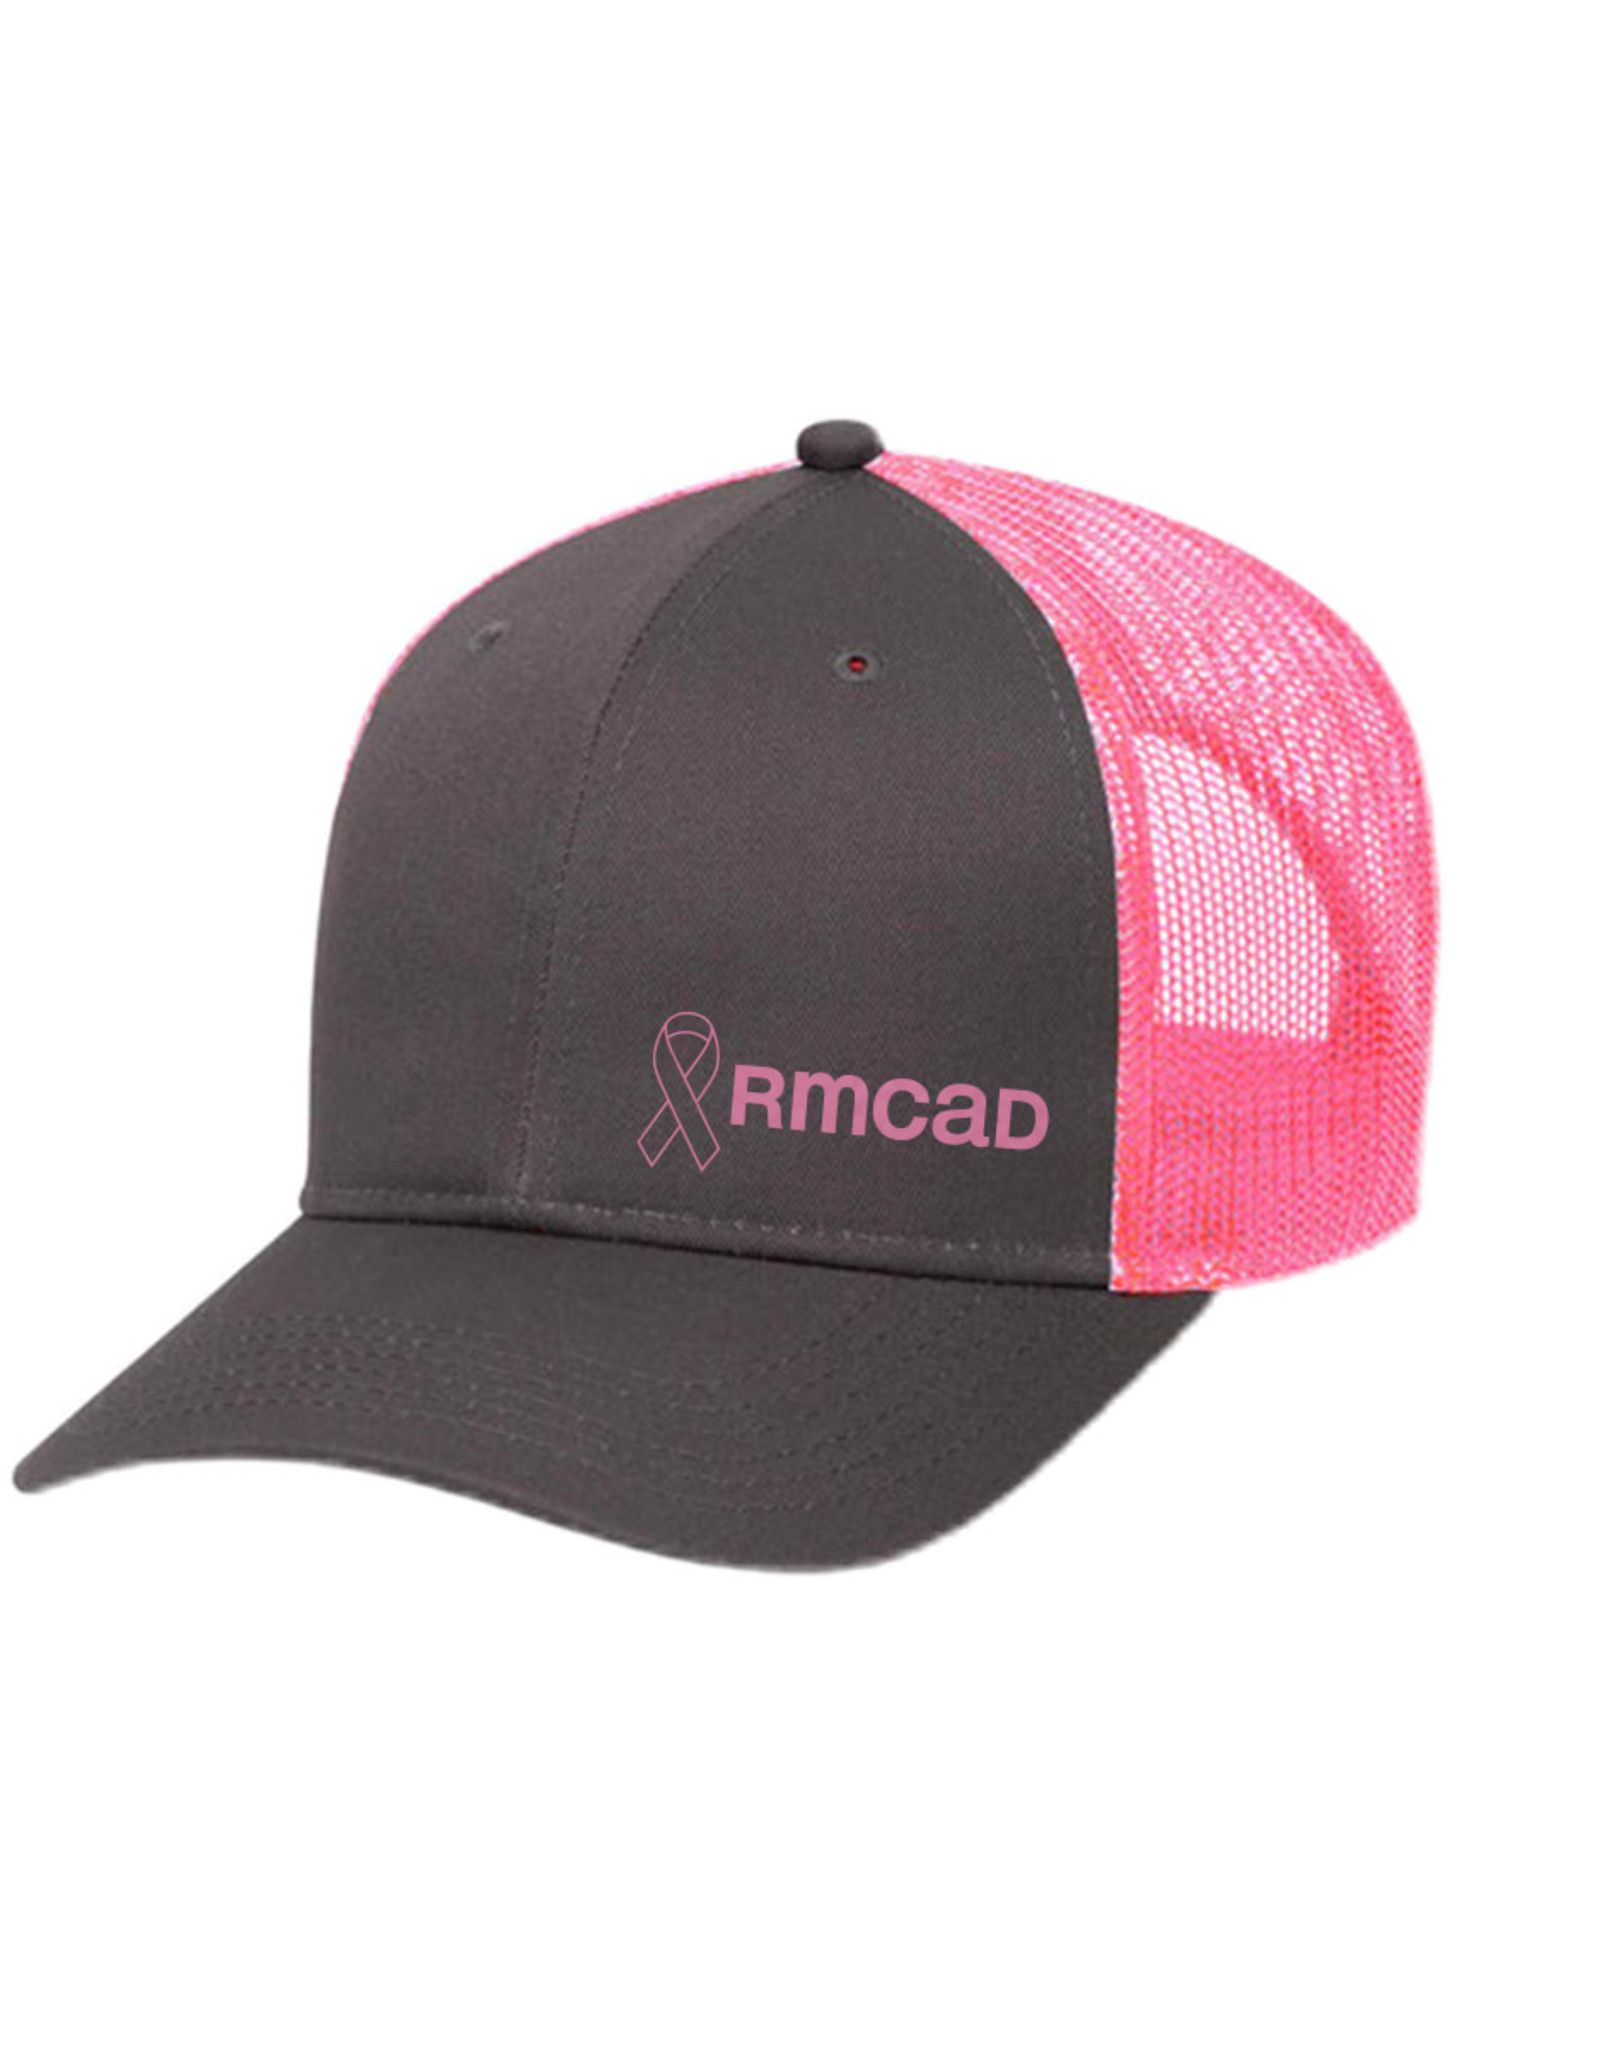 RMCAD Pink and Grey Trucker Hat